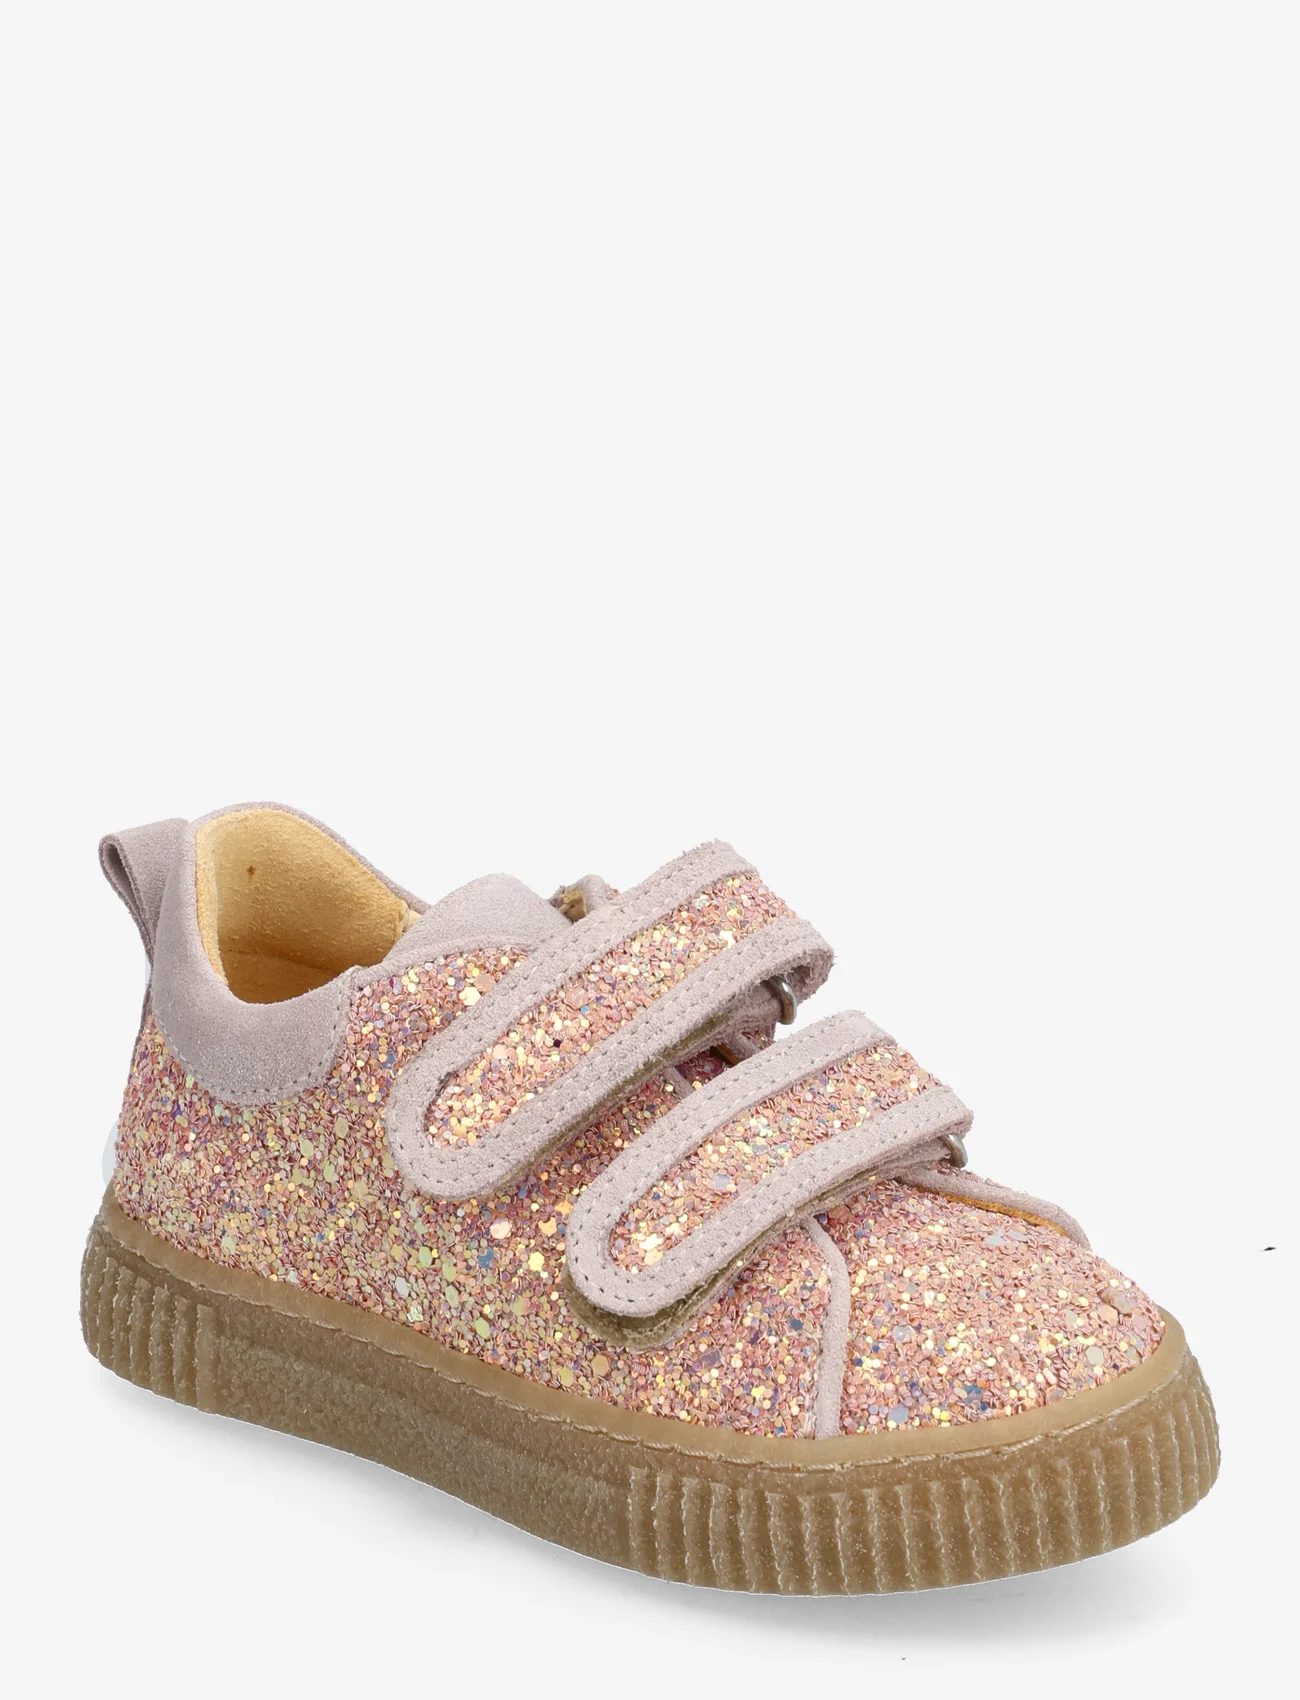 ANGULUS - Shoes - flat - with velcro - sommarfynd - 2750/2731 rose glitter/pale ro - 0